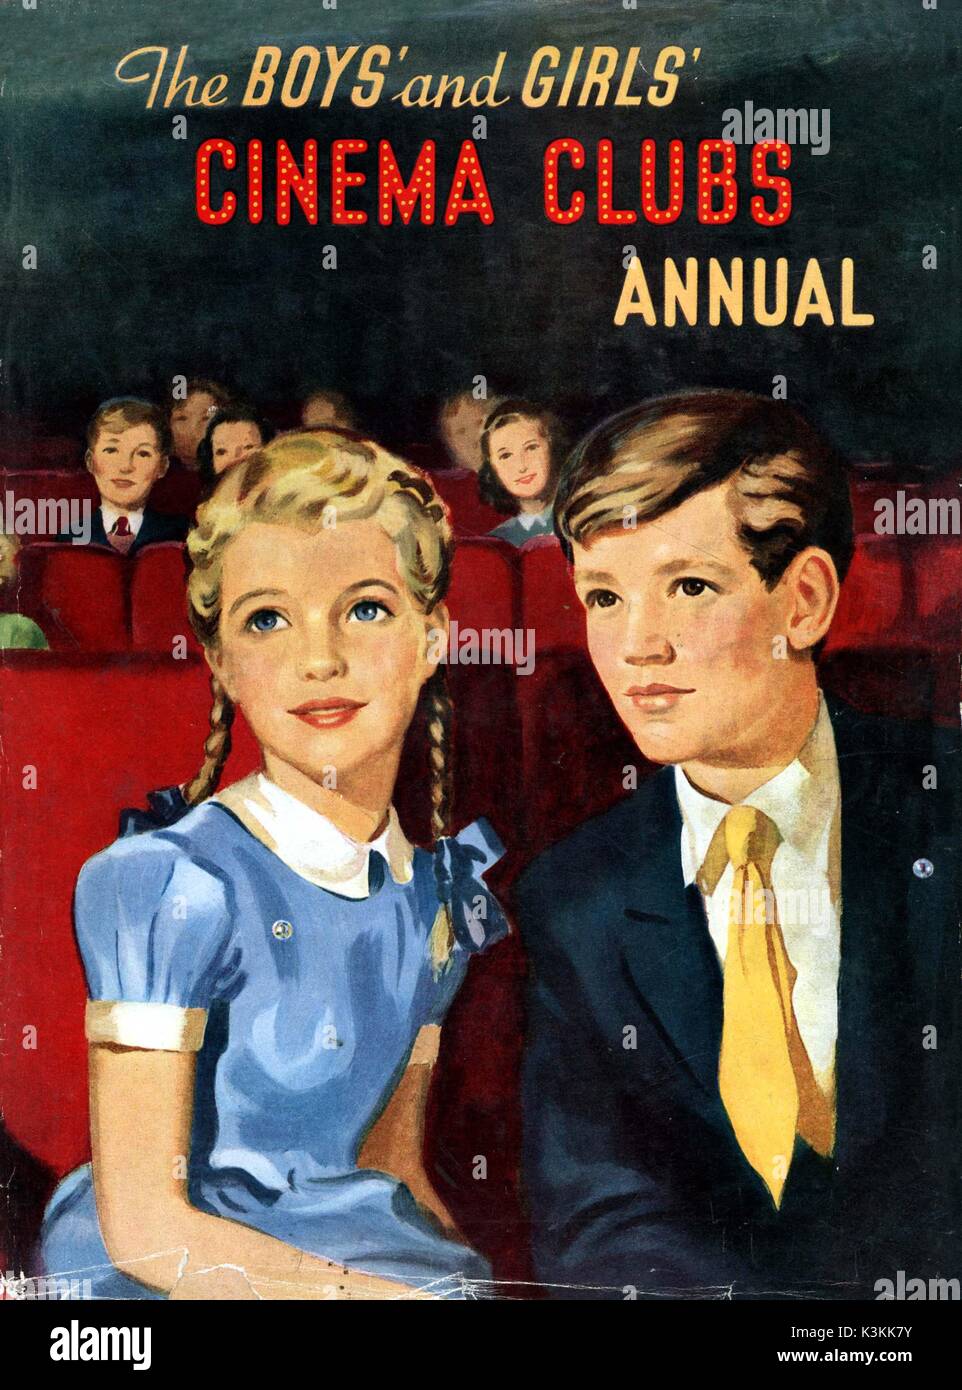 THE BOYS AND GIRLS CINEMA CLUBS ANNUAL 1948 Stock Photo